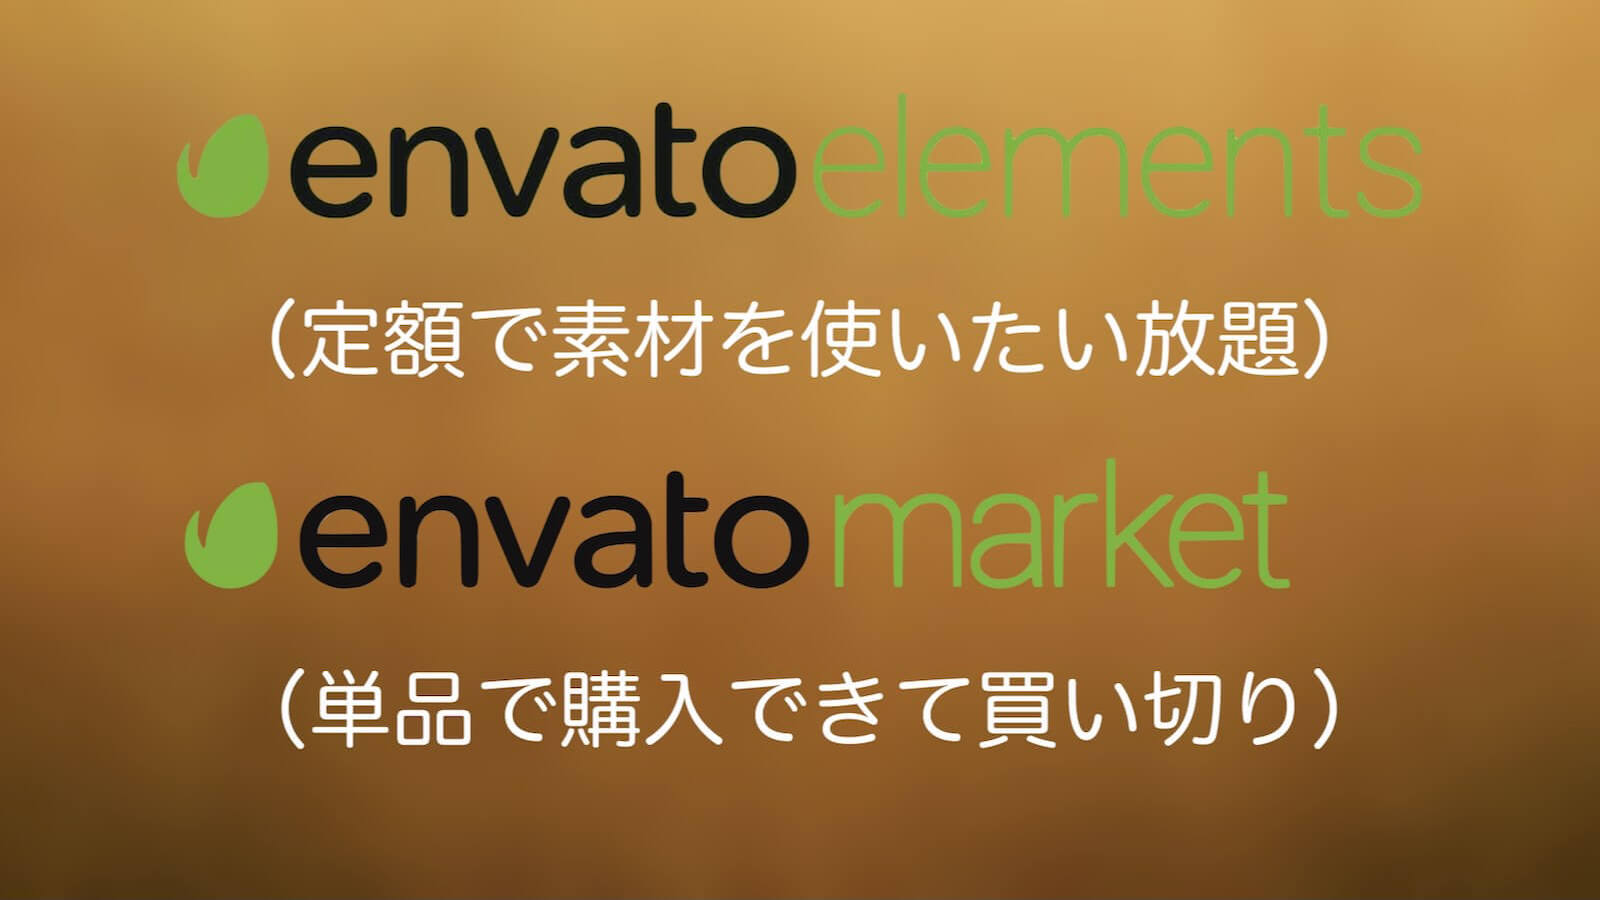 Differences between envato elements and Market